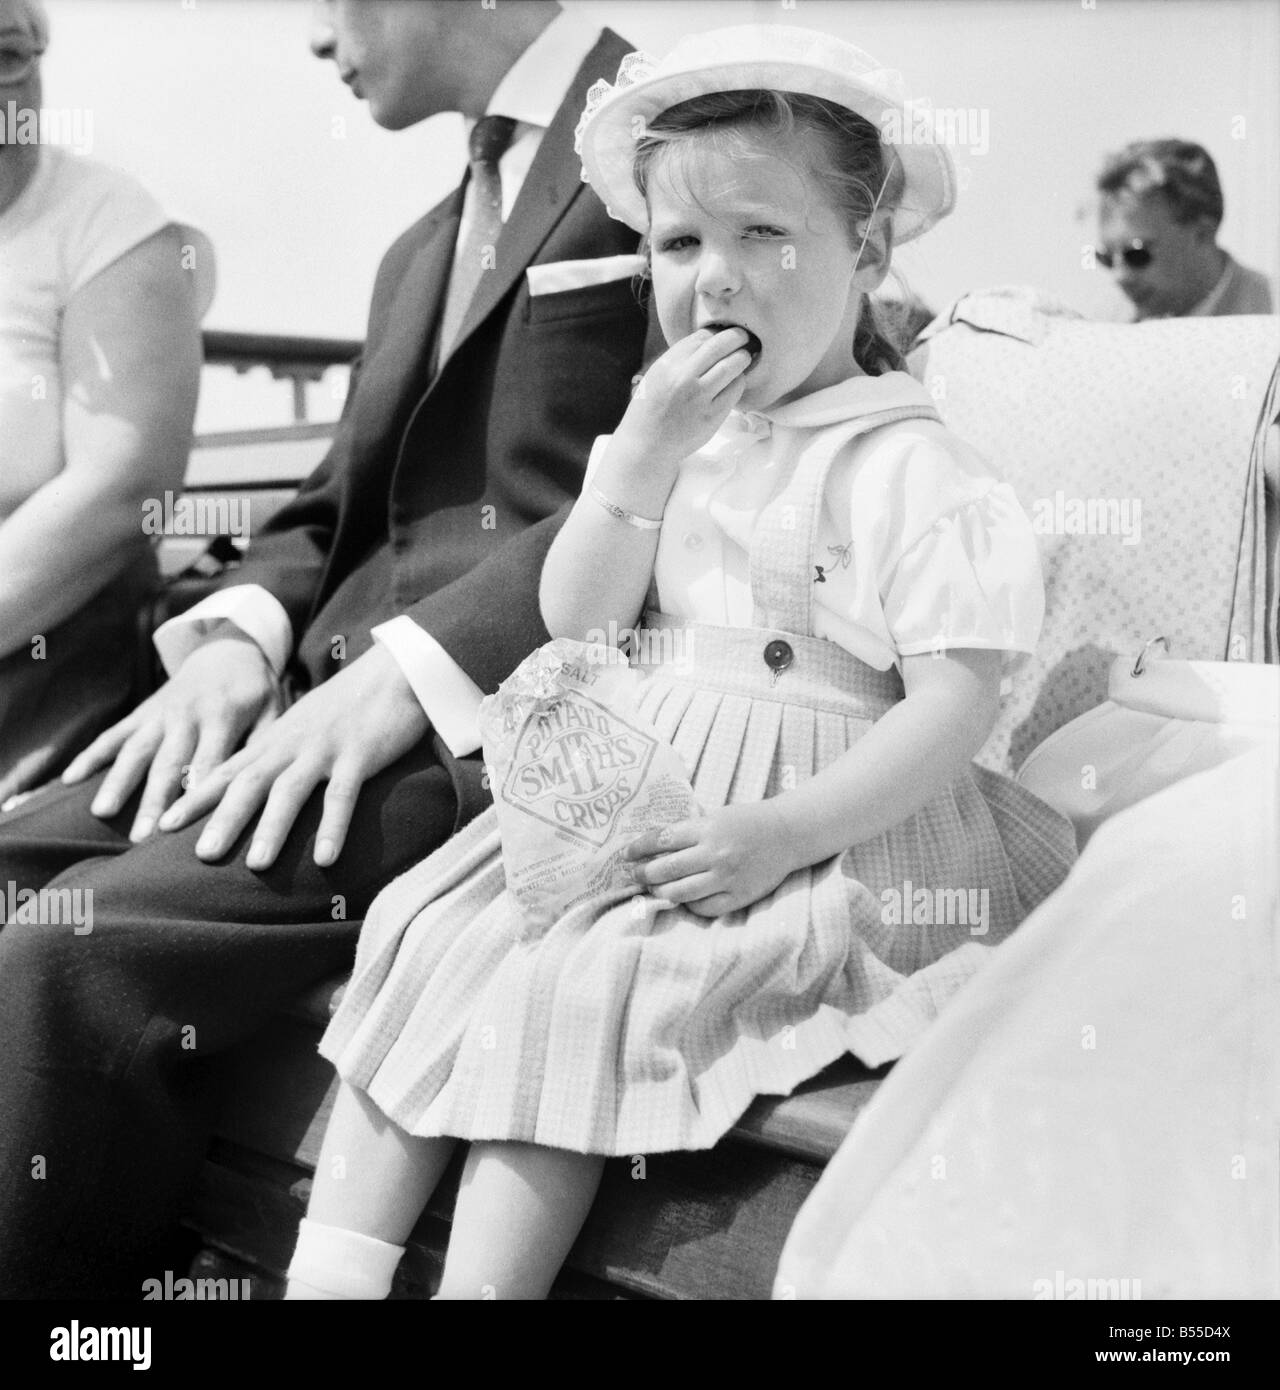 Cafe france 1960s Black and White Stock Photos & Images - Alamy